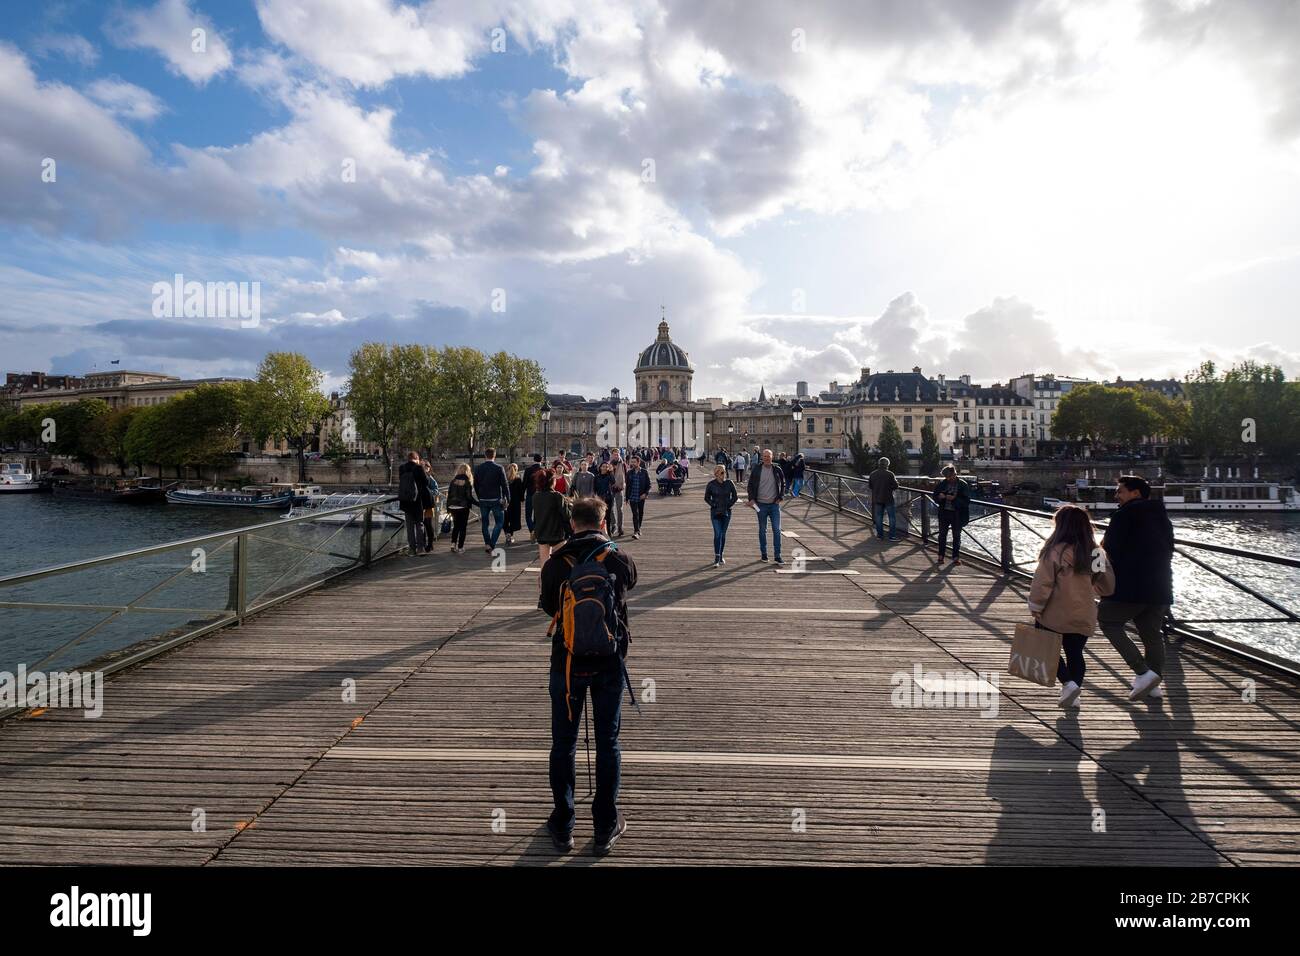 Pont des Arts bridge over the river Seine with the Académie française - French Academy in the background, Paris, France, Europe Stock Photo